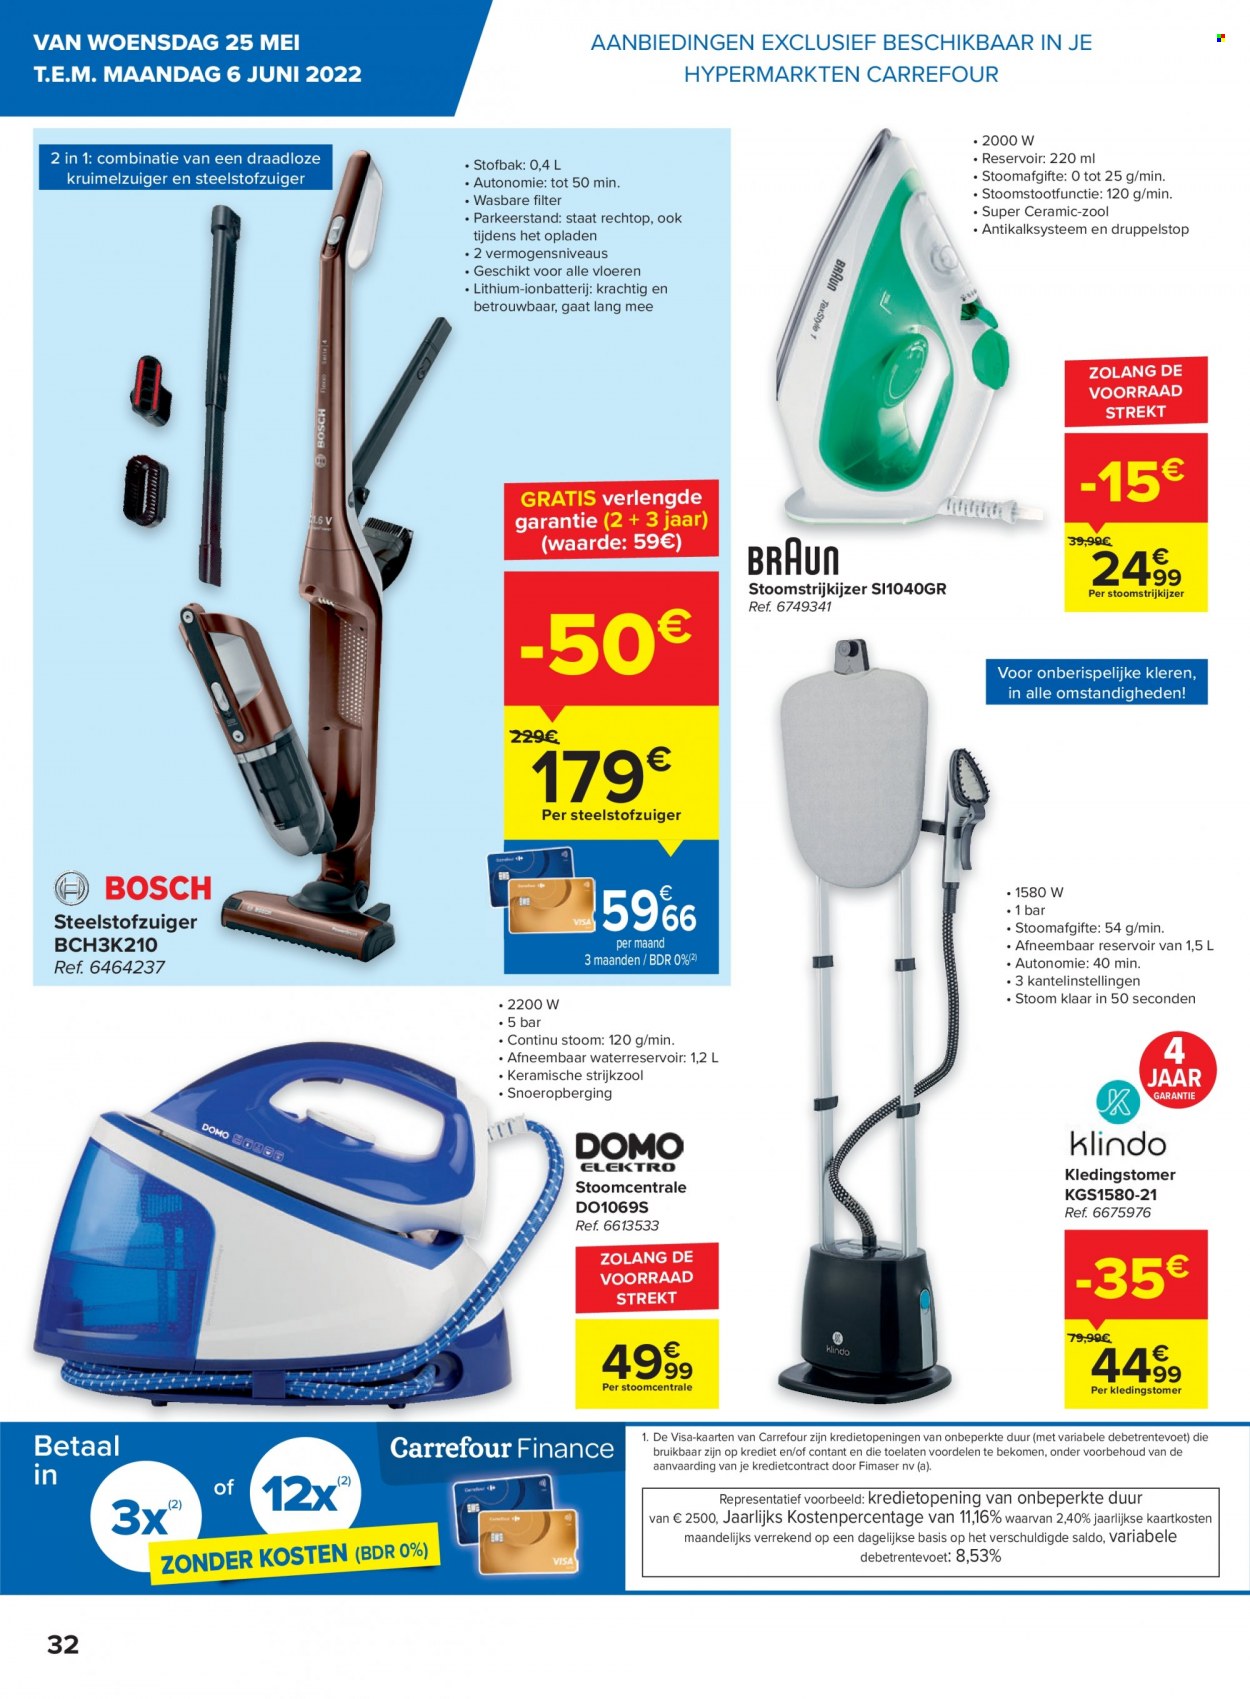 Catalogue Carrefour hypermarkt - 24.5.2022 - 30.5.2022. Page 32.